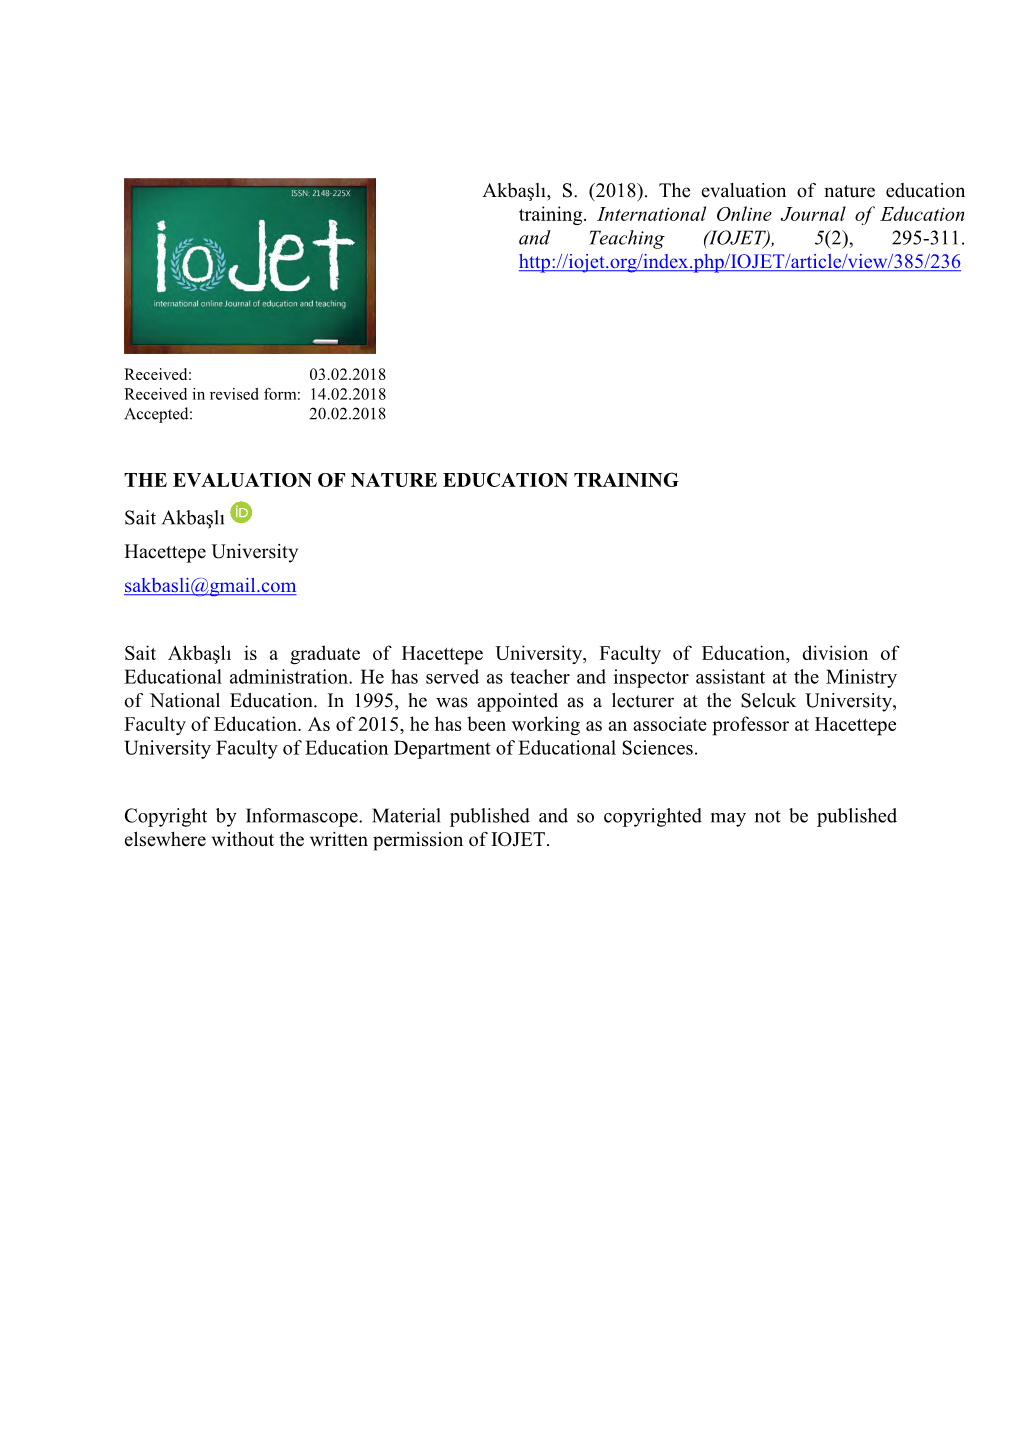 The Evaluation of Nature Education Training. International Online Journal of Education and Teaching (IOJET), 5(2), 295-311